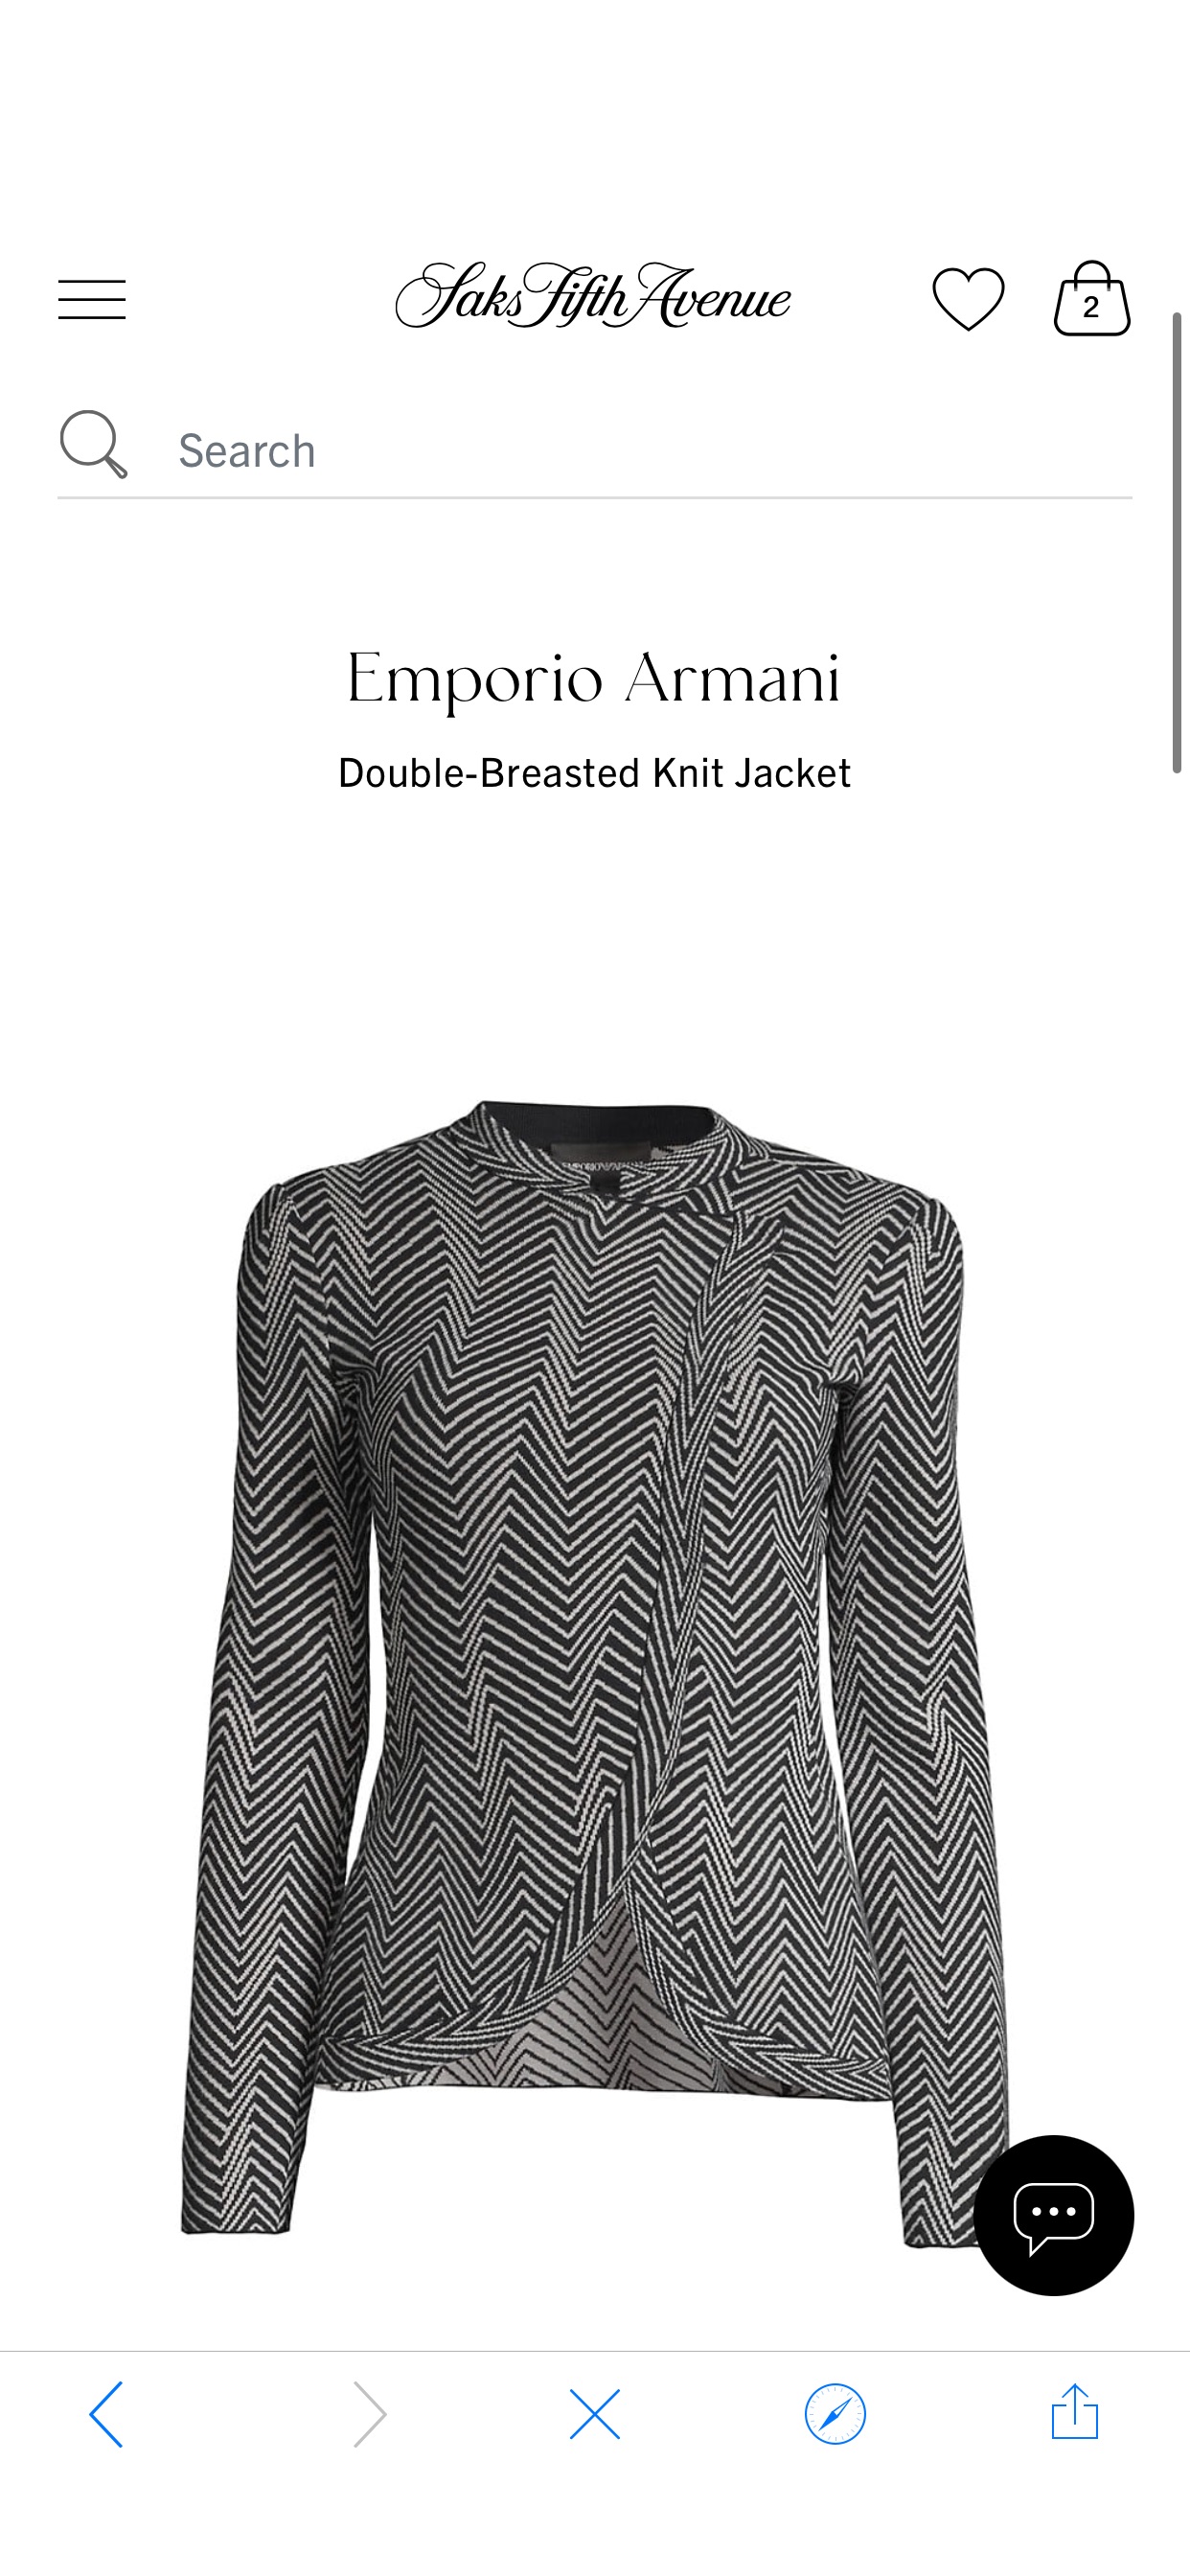 Shop Emporio Armani Double-Breasted Knit Jacket | Saks Fifth Avenue
上衣